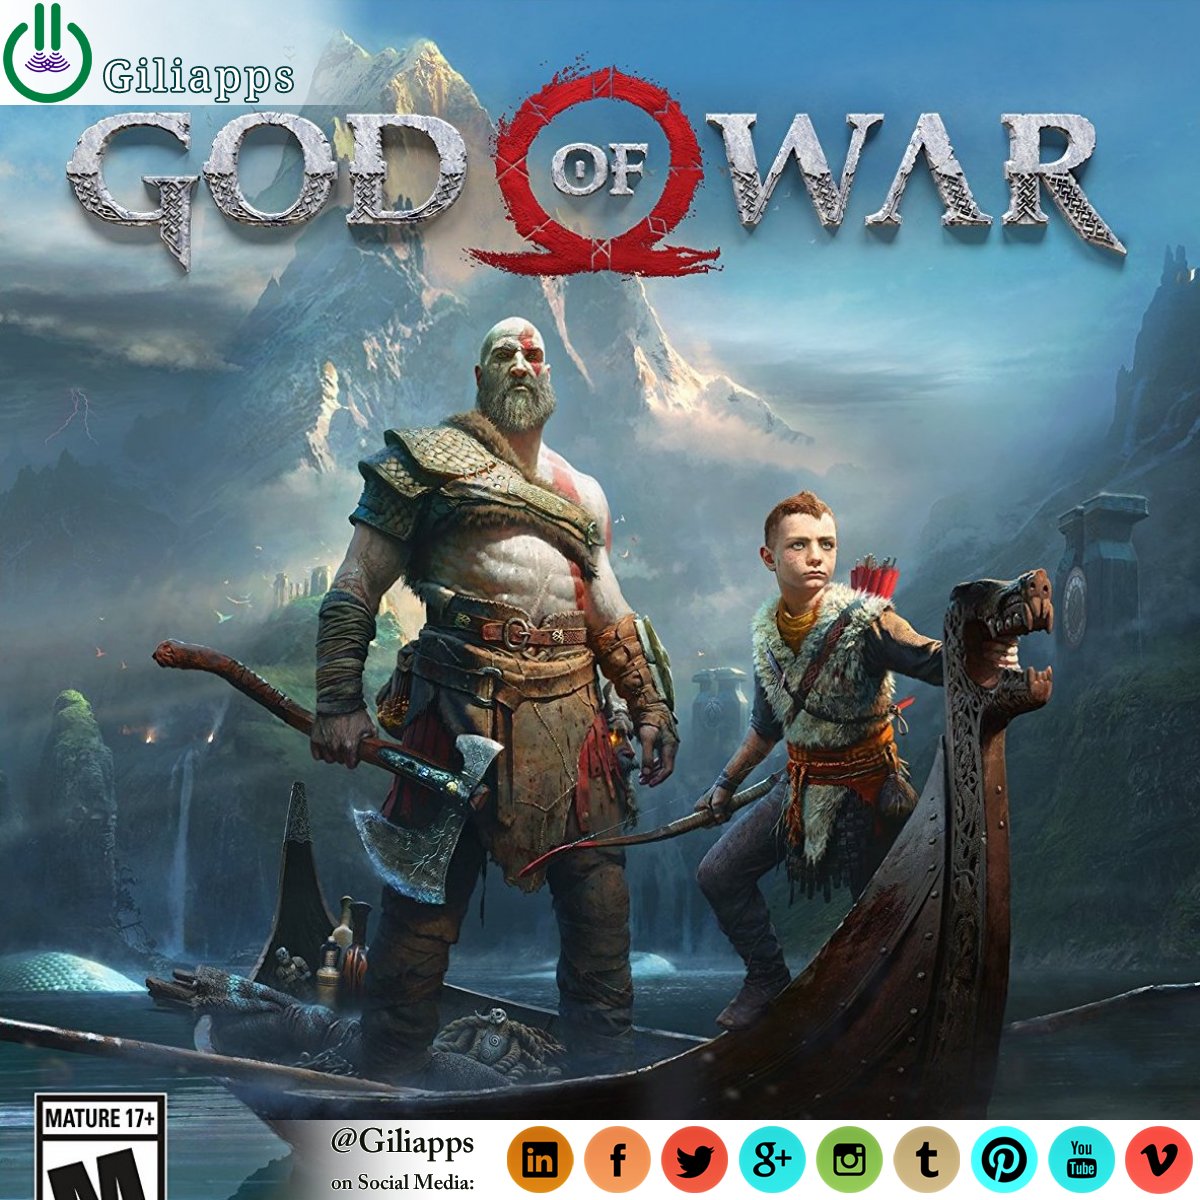 God of War 4 will release on 20 Apr 2018